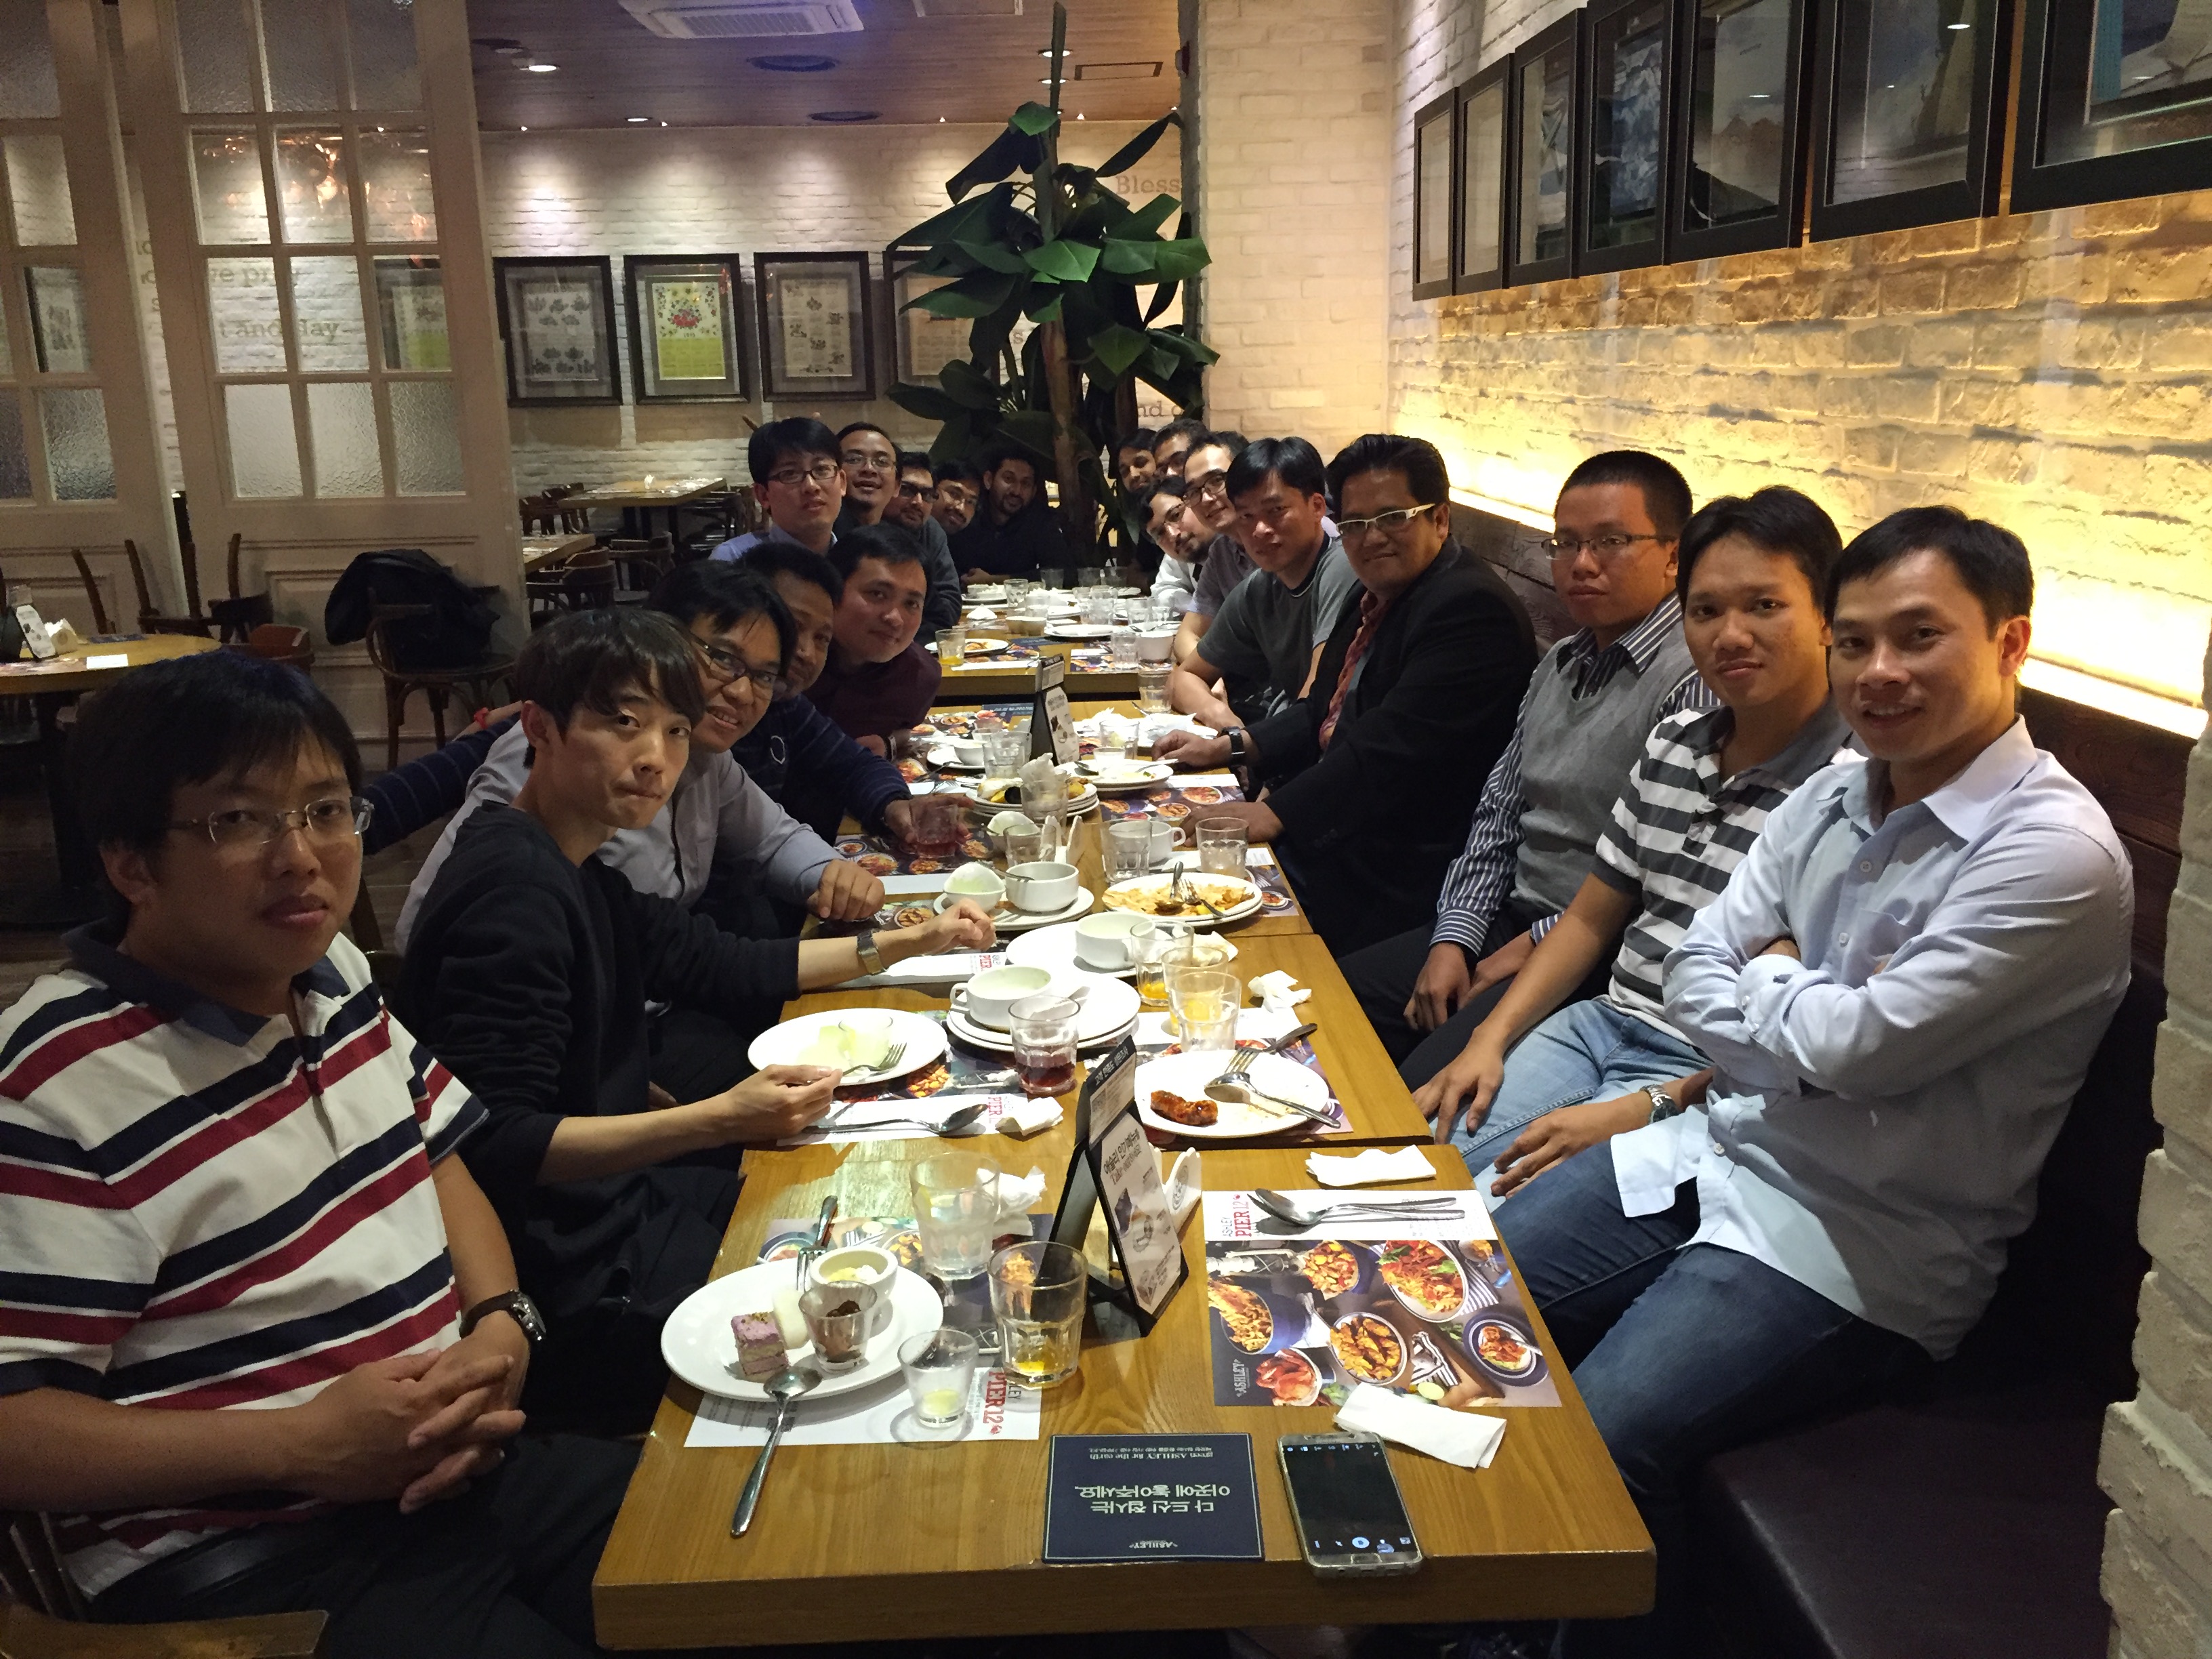 2015-10-19_With current and former lab members 1 2015-10-19_With current and former lab members 1.JPG